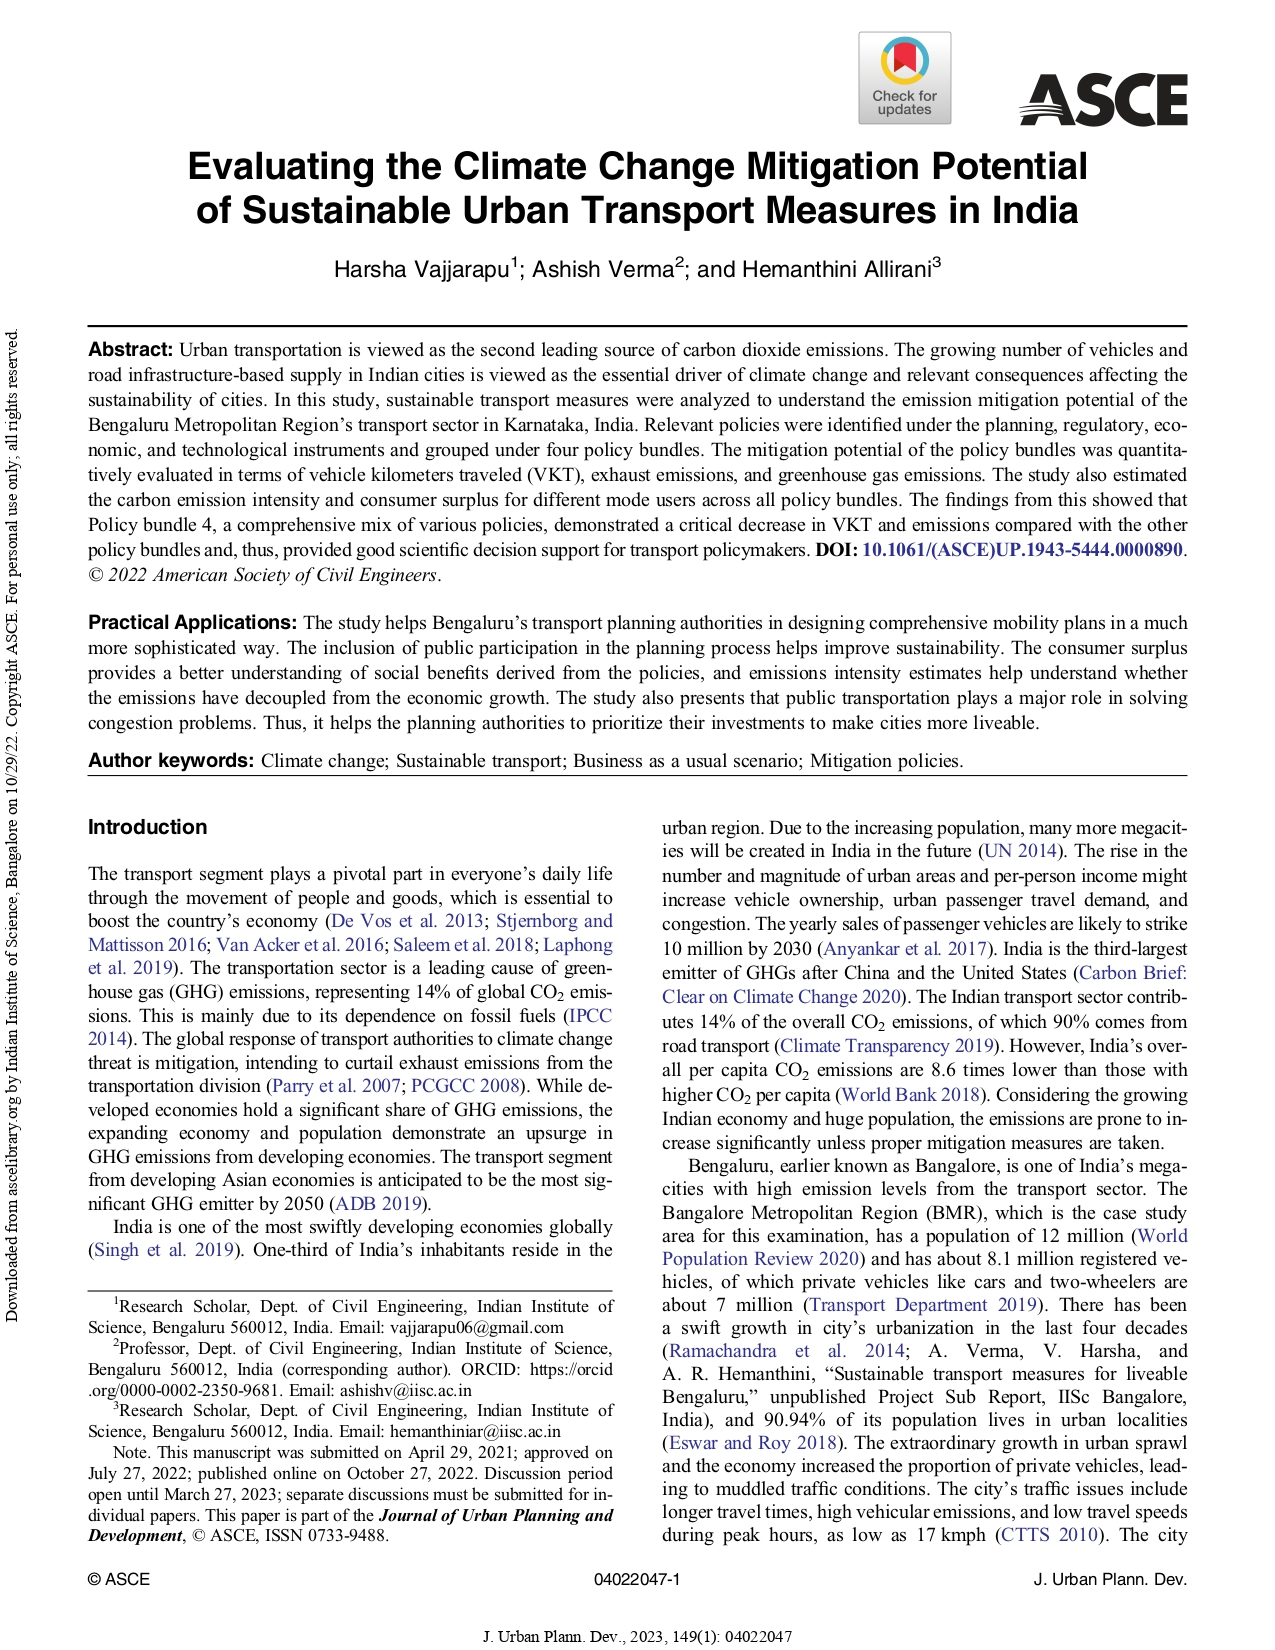 Evaluating the Climate Change Mitigation Potential of Sustainable Urban Transport Measures in India